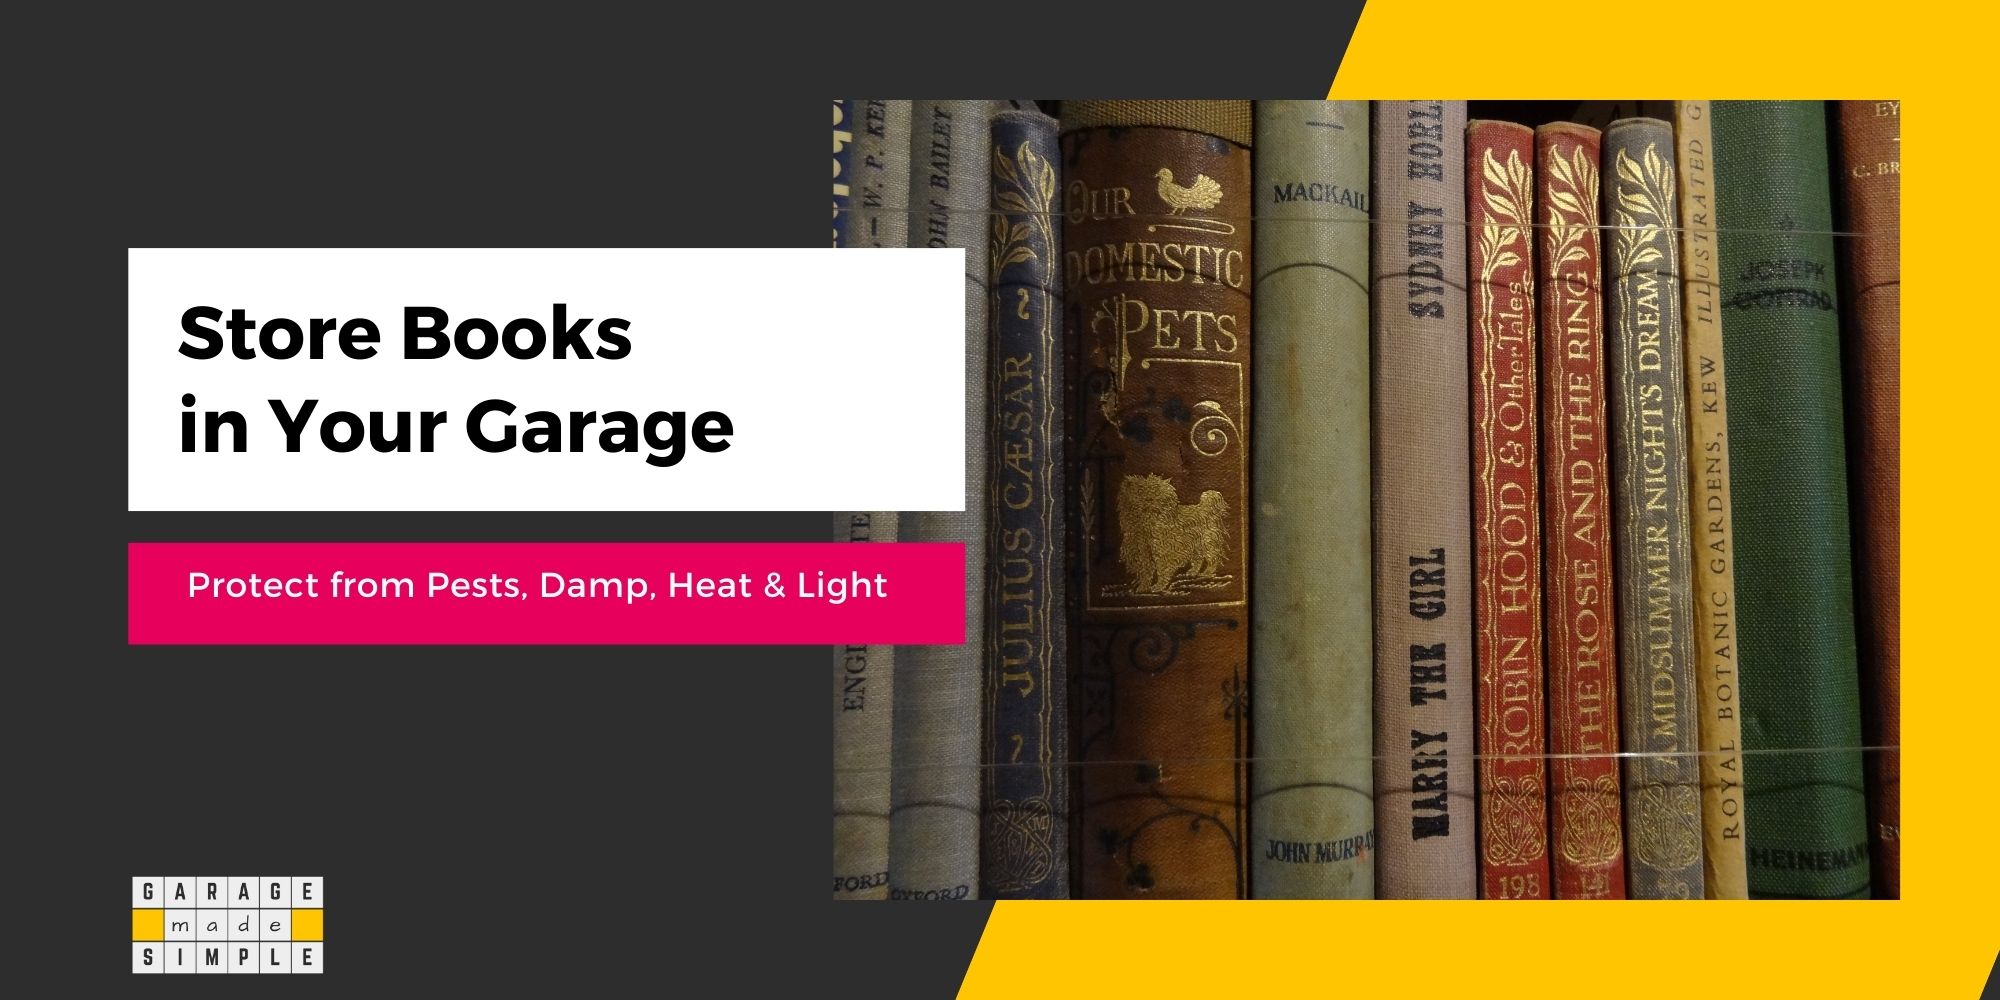 How To Store Books In Your Garage The Right Way!